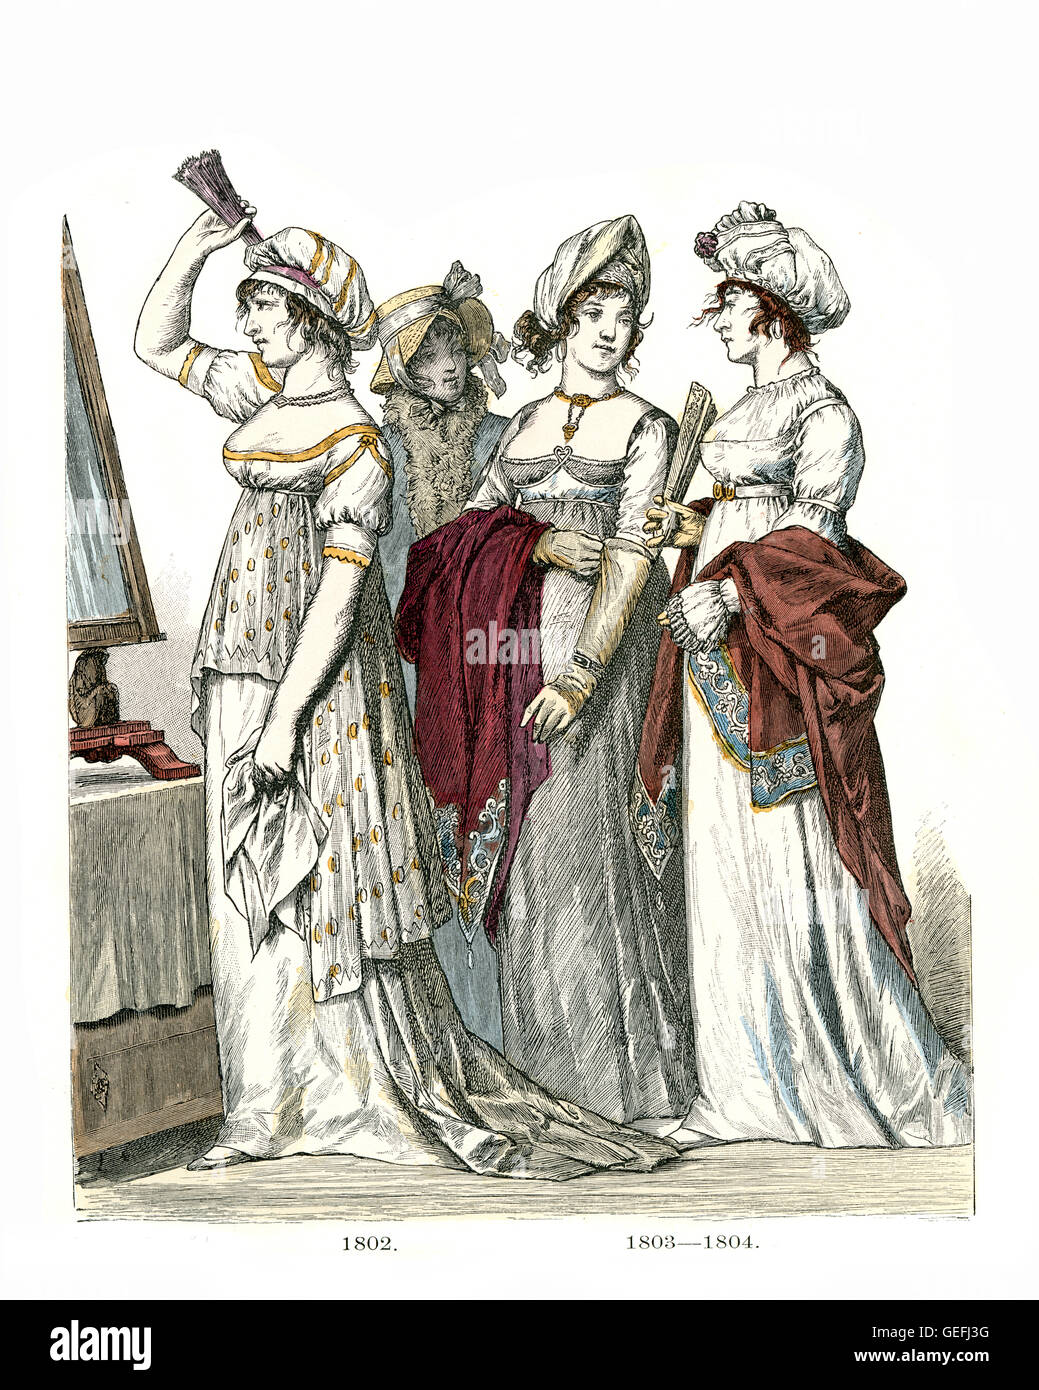 Women's fashions at the start of the 19th century Stock Photo